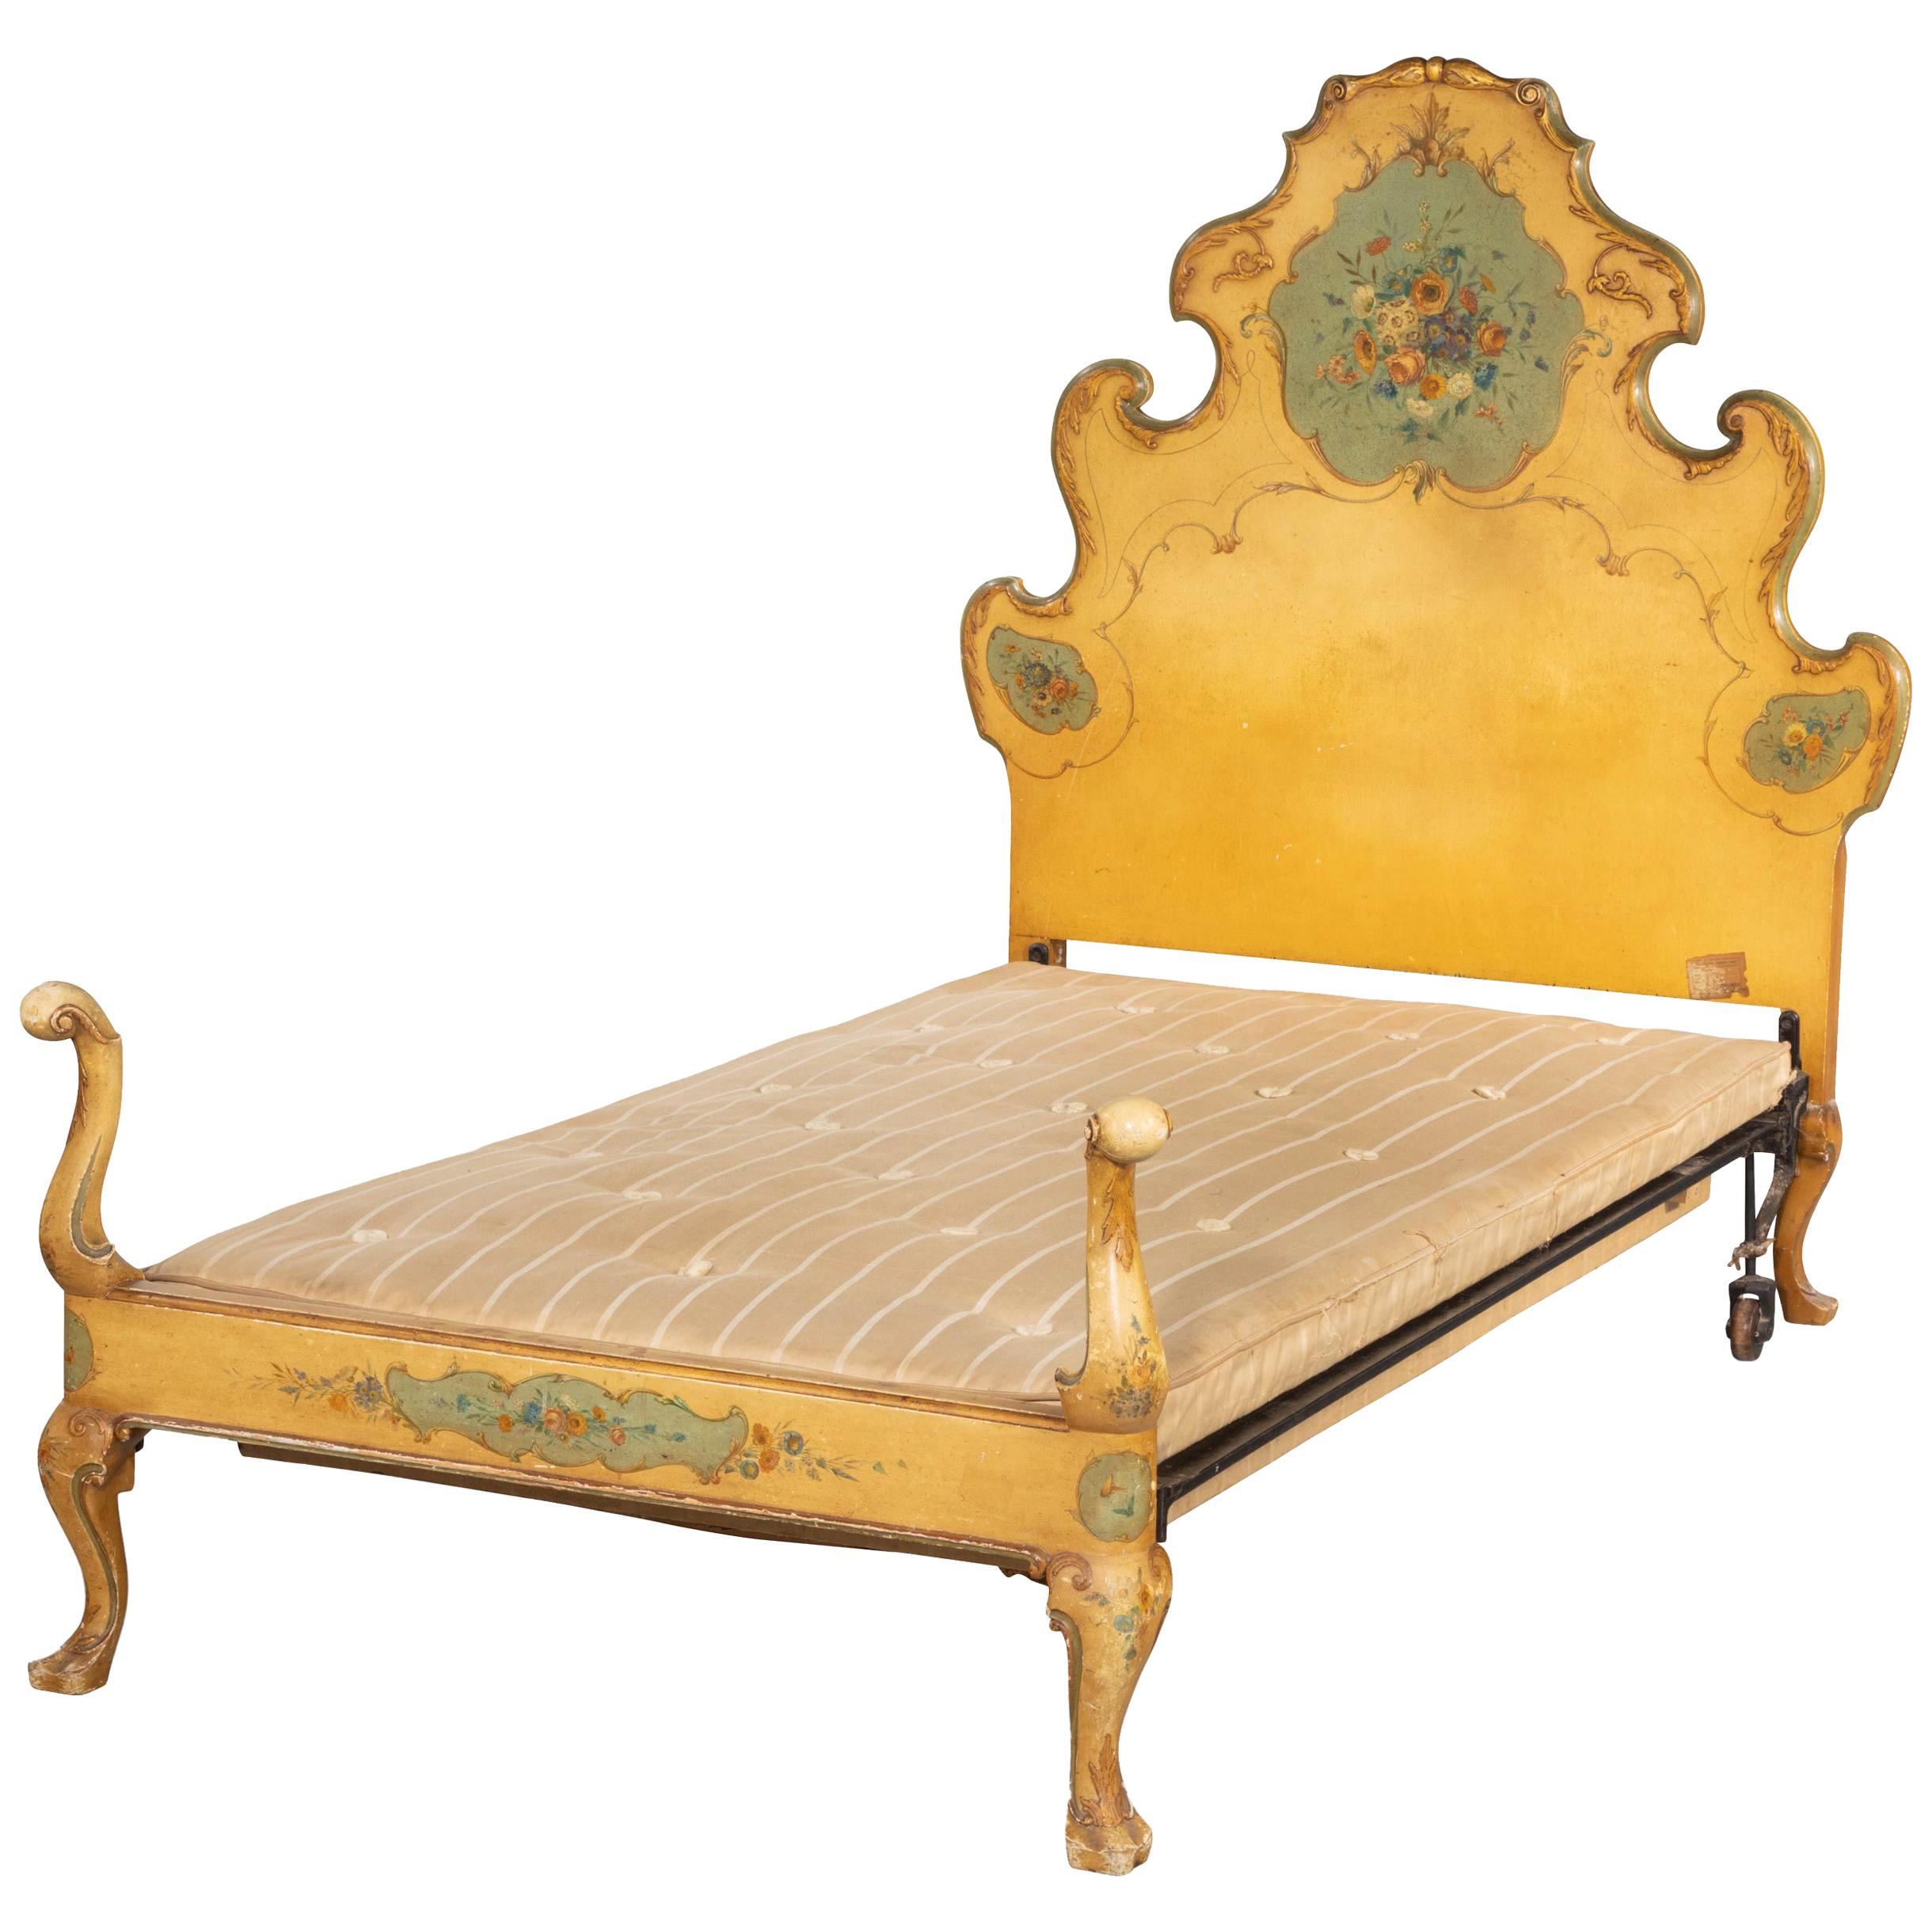 Very Stylish Early 20th Century Single Bed with a Rococo Headboard